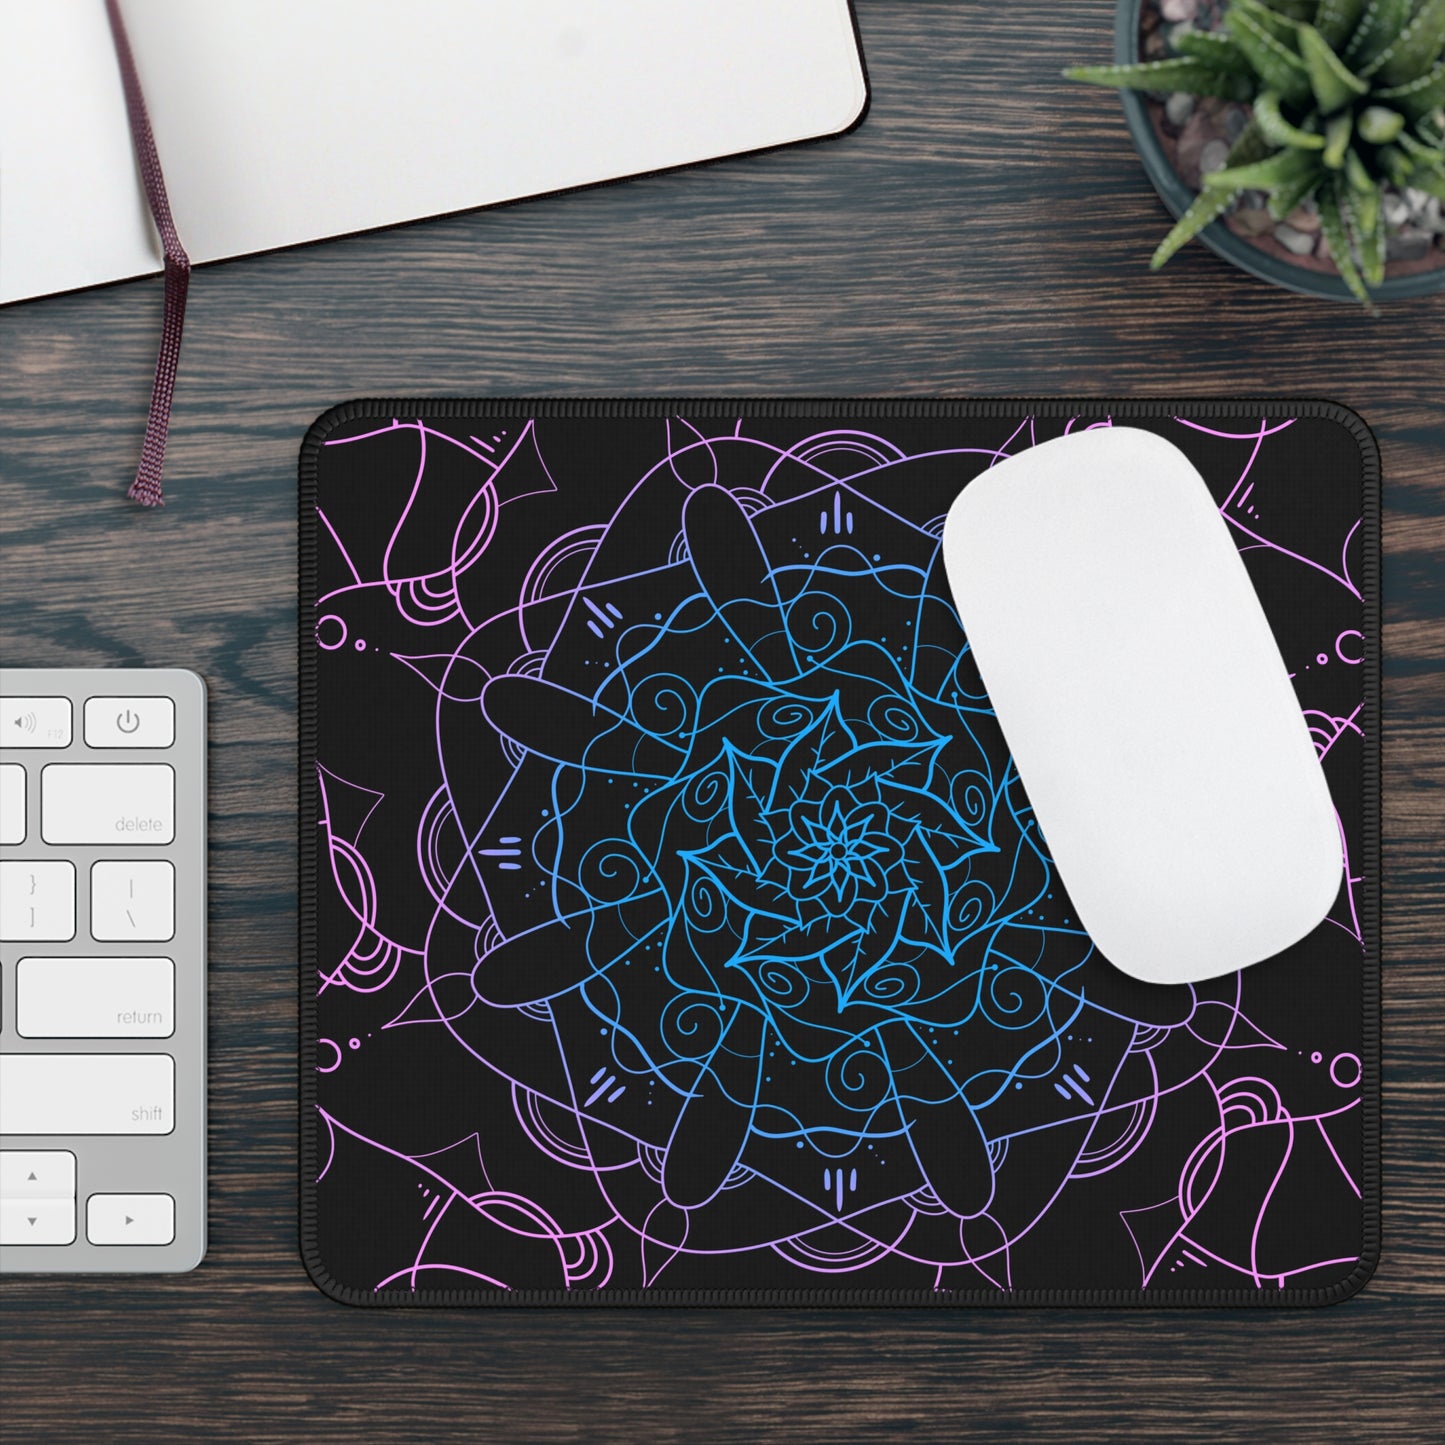 A gaming mouse pad with a pink and blue mandala pattern on a black background. A mouse sits on top of it.